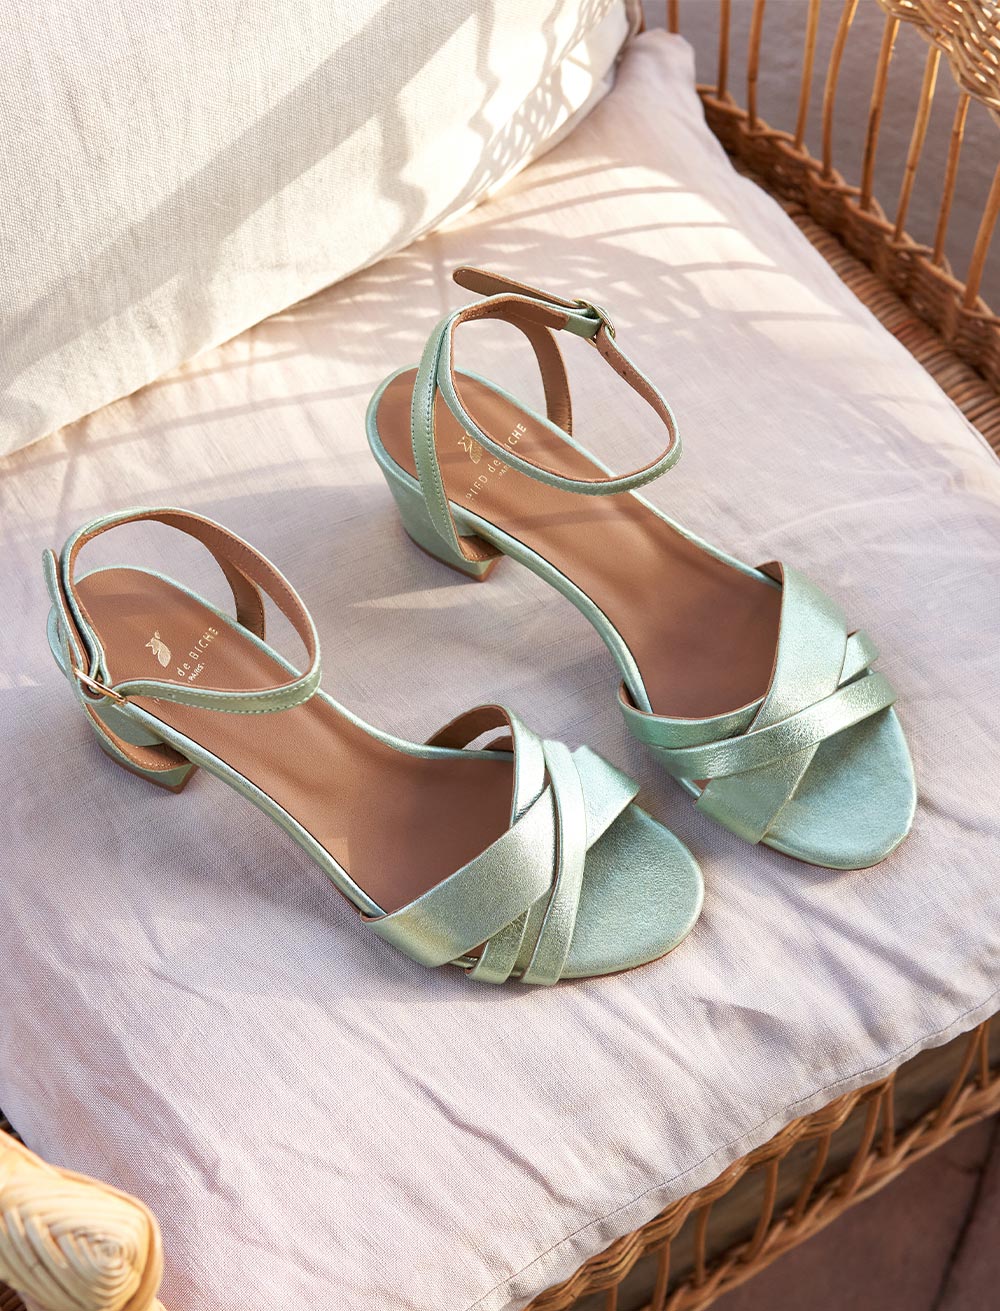 Leonore mid-high sandals - Iridescent pastel green